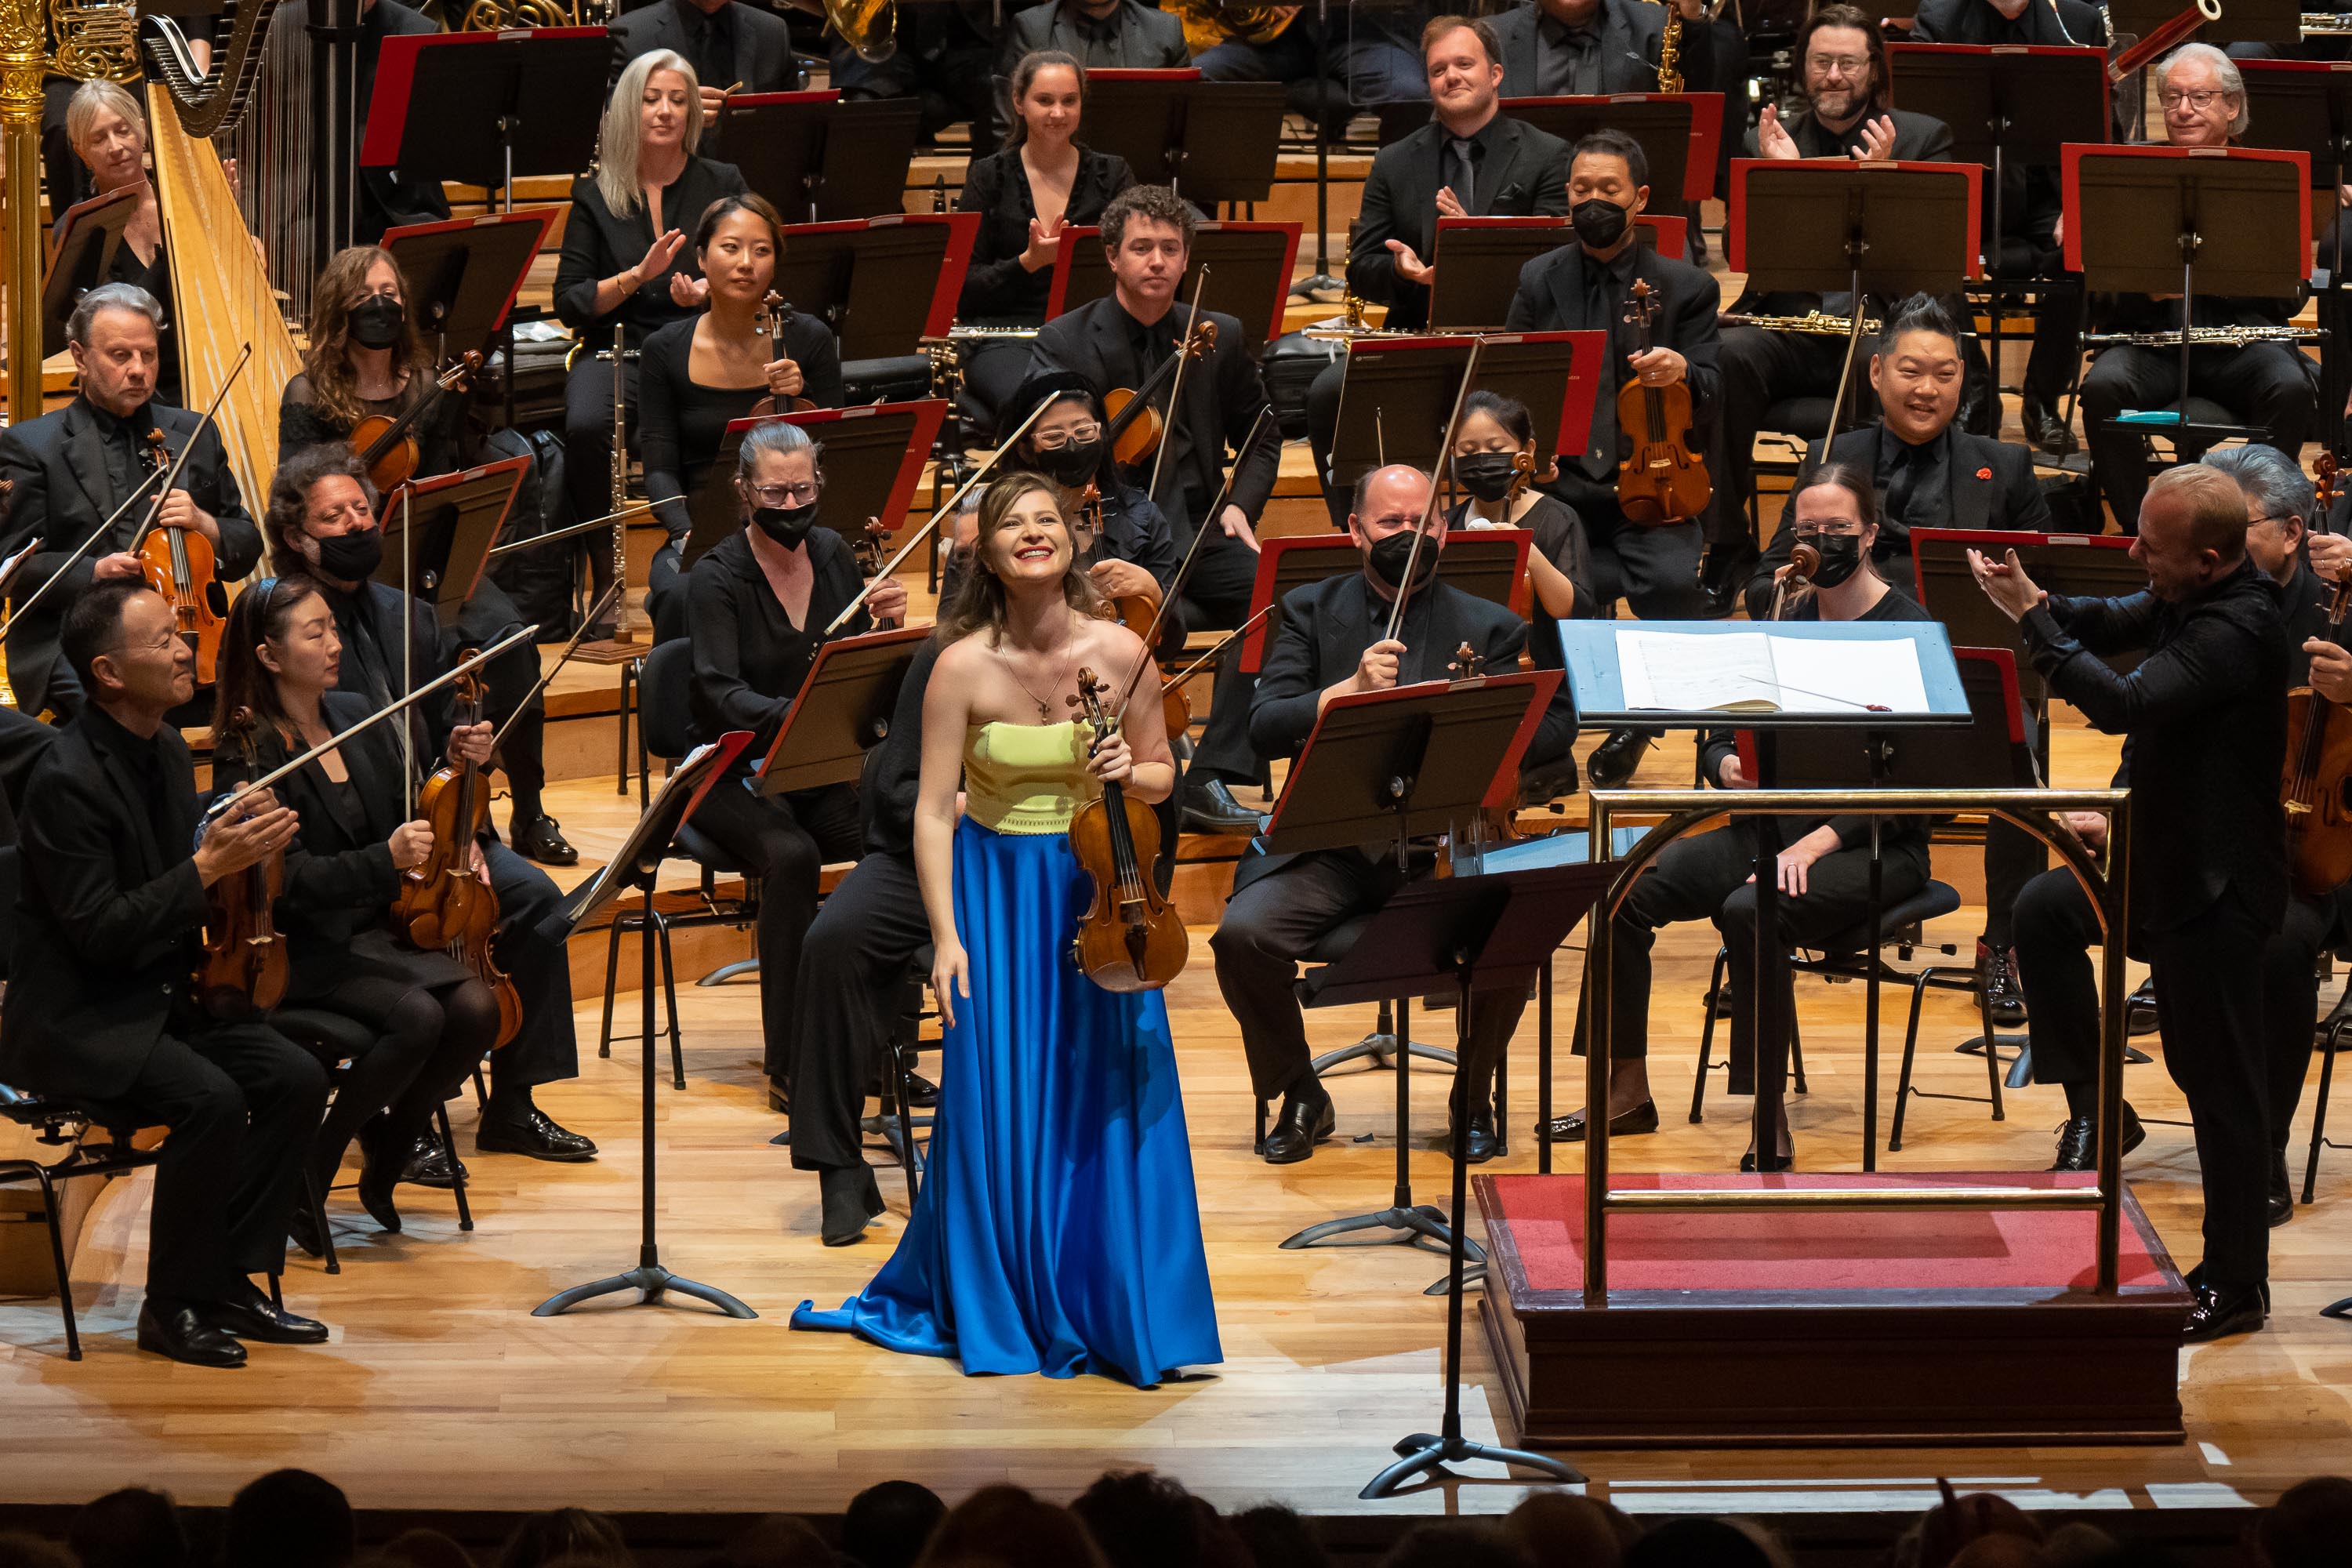 Lisa is applauded by Yannick, the Orchestra, and the audience at the end of the Concerto